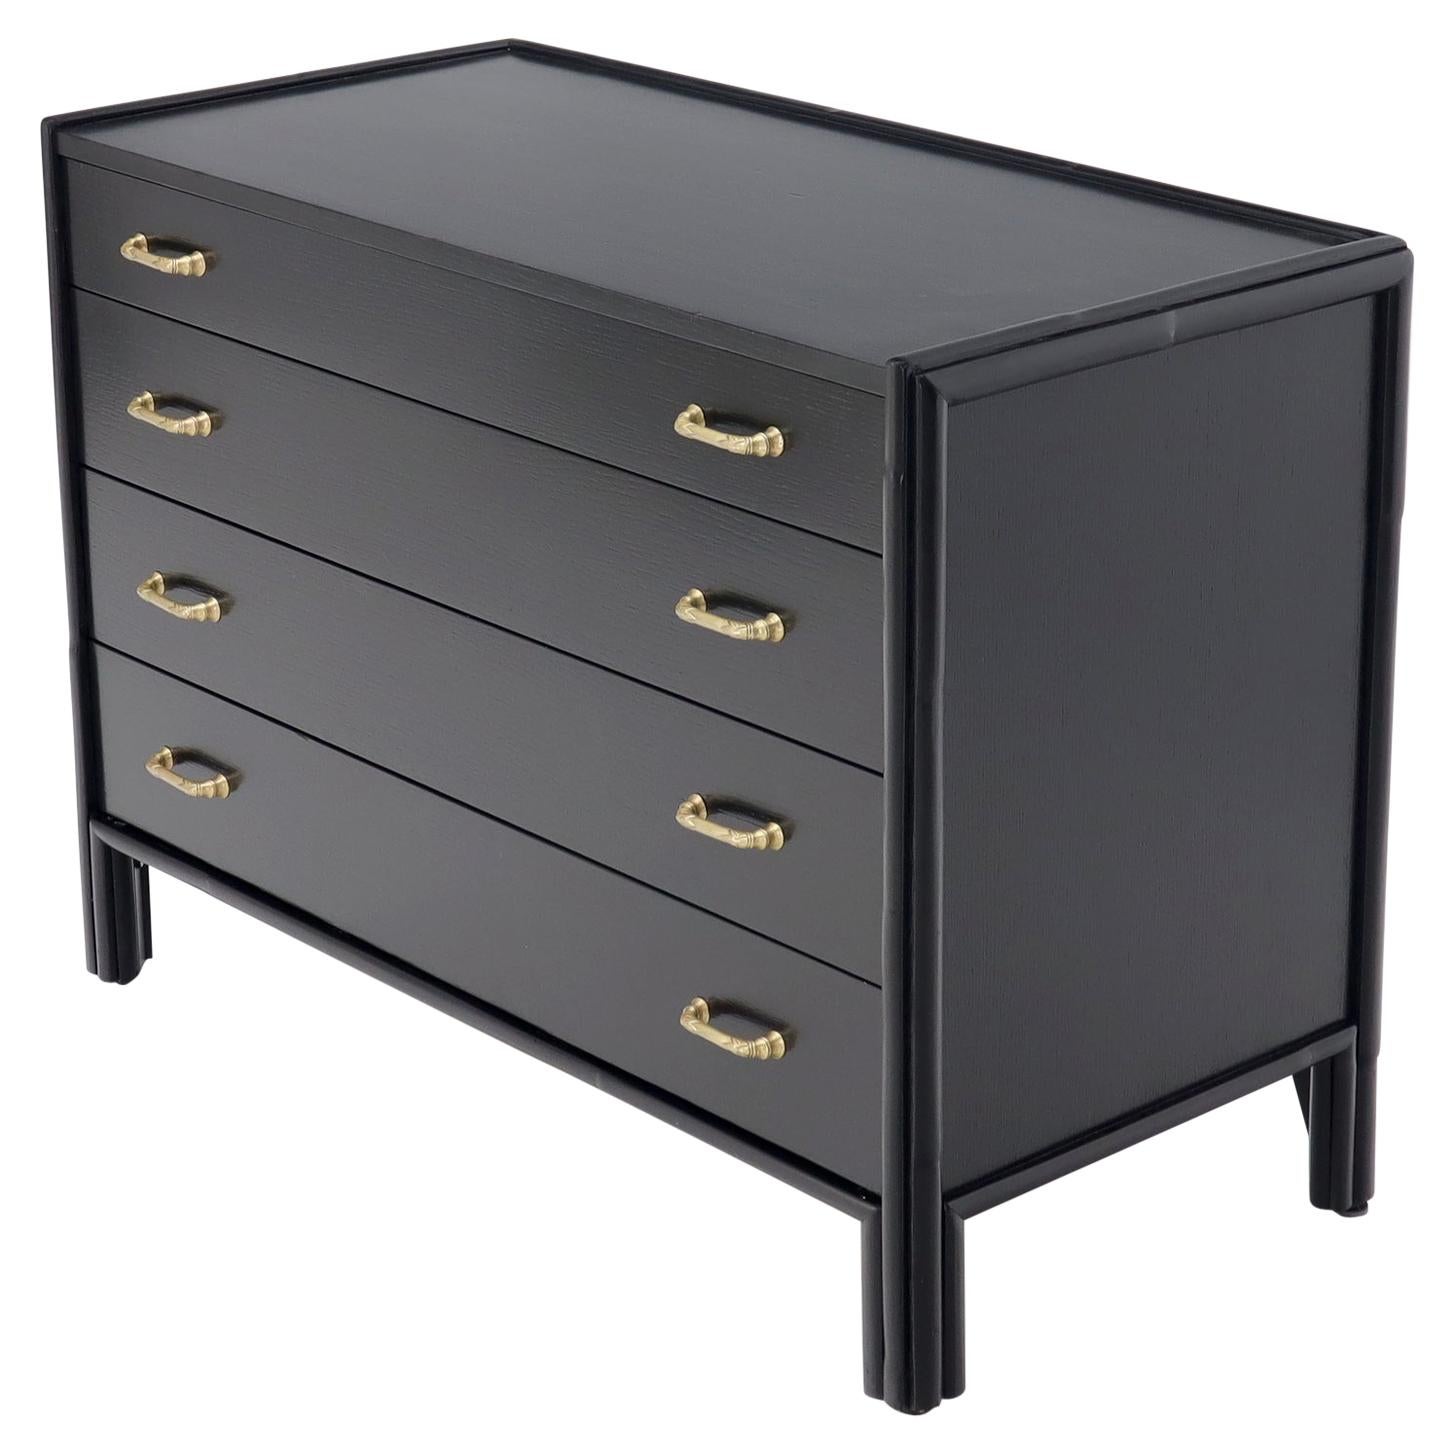 McGuire Faux Bamboo Black Lacquer Four-Drawer Dresser with Cast Brass Pulls